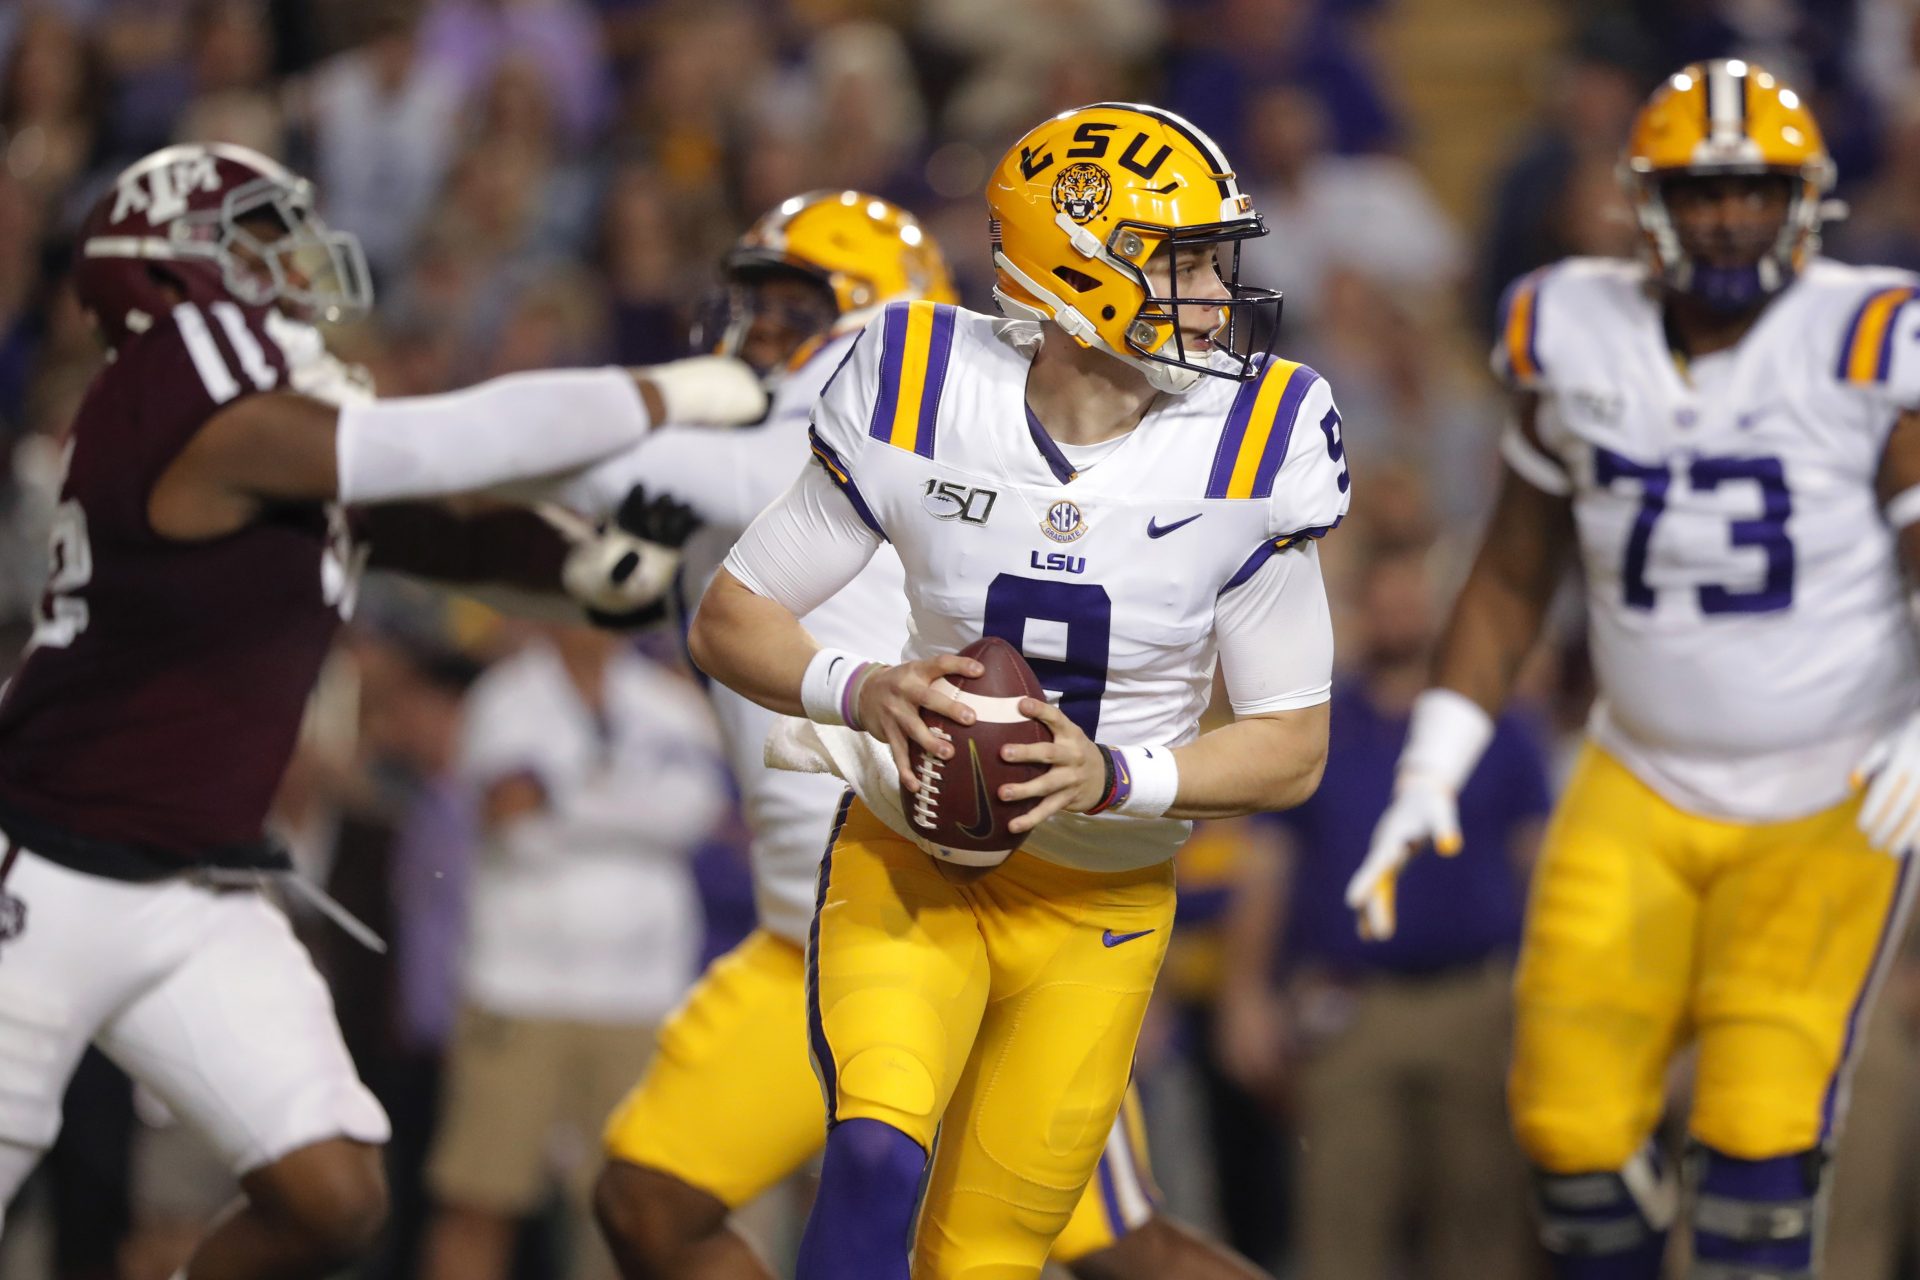 LSU quarterback Joe Burrow (9) looks for a receiver during the first half of the team's NCAA college football game against Texas A&M in Baton Rouge, La., Saturday, Nov. 30, 2019.